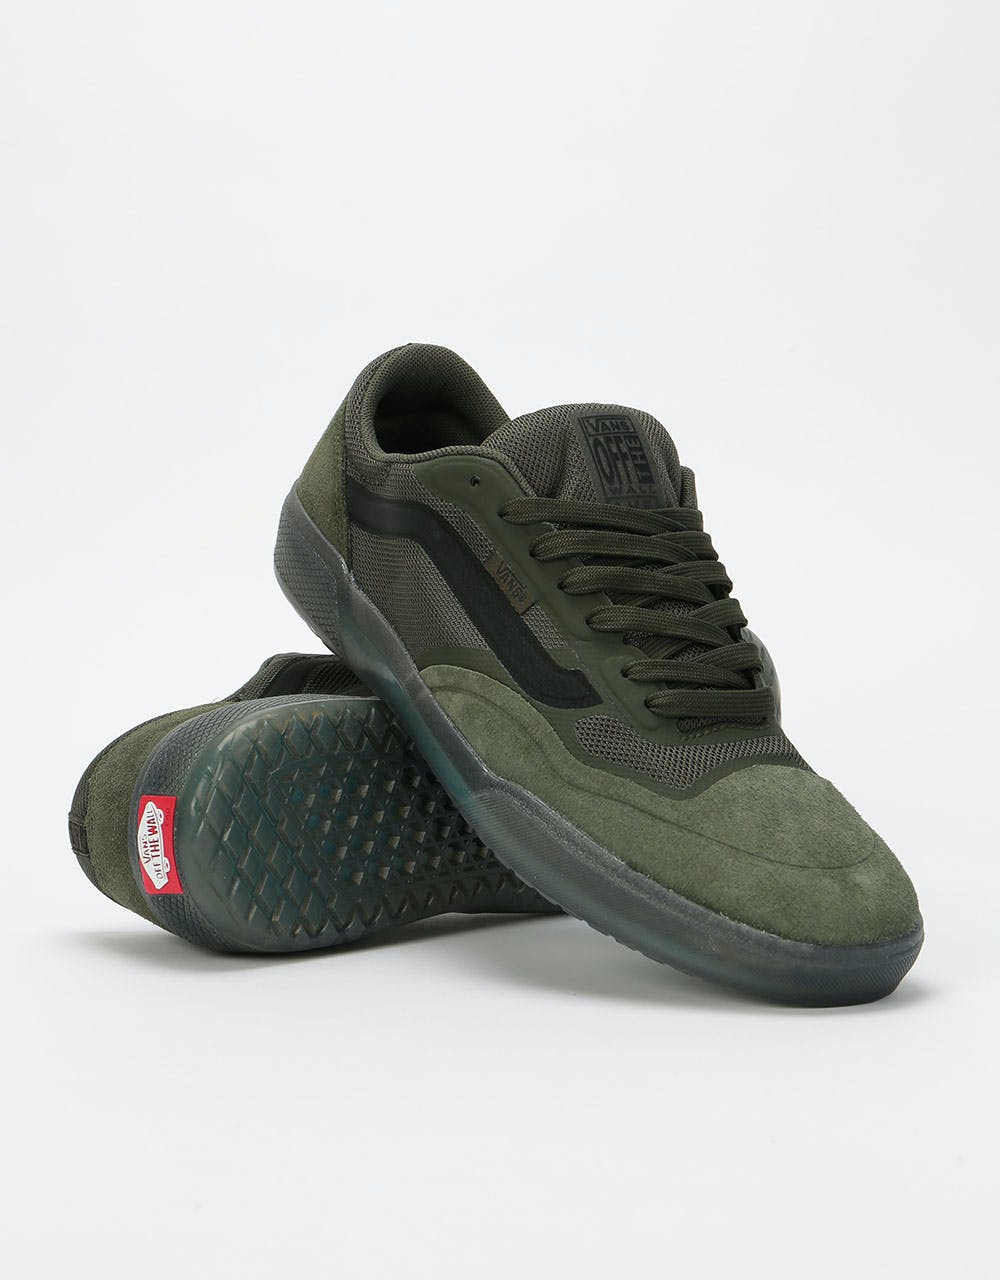 Vans Ave Pro Skate Shoes - (Rainy Day) Forest Night/Black